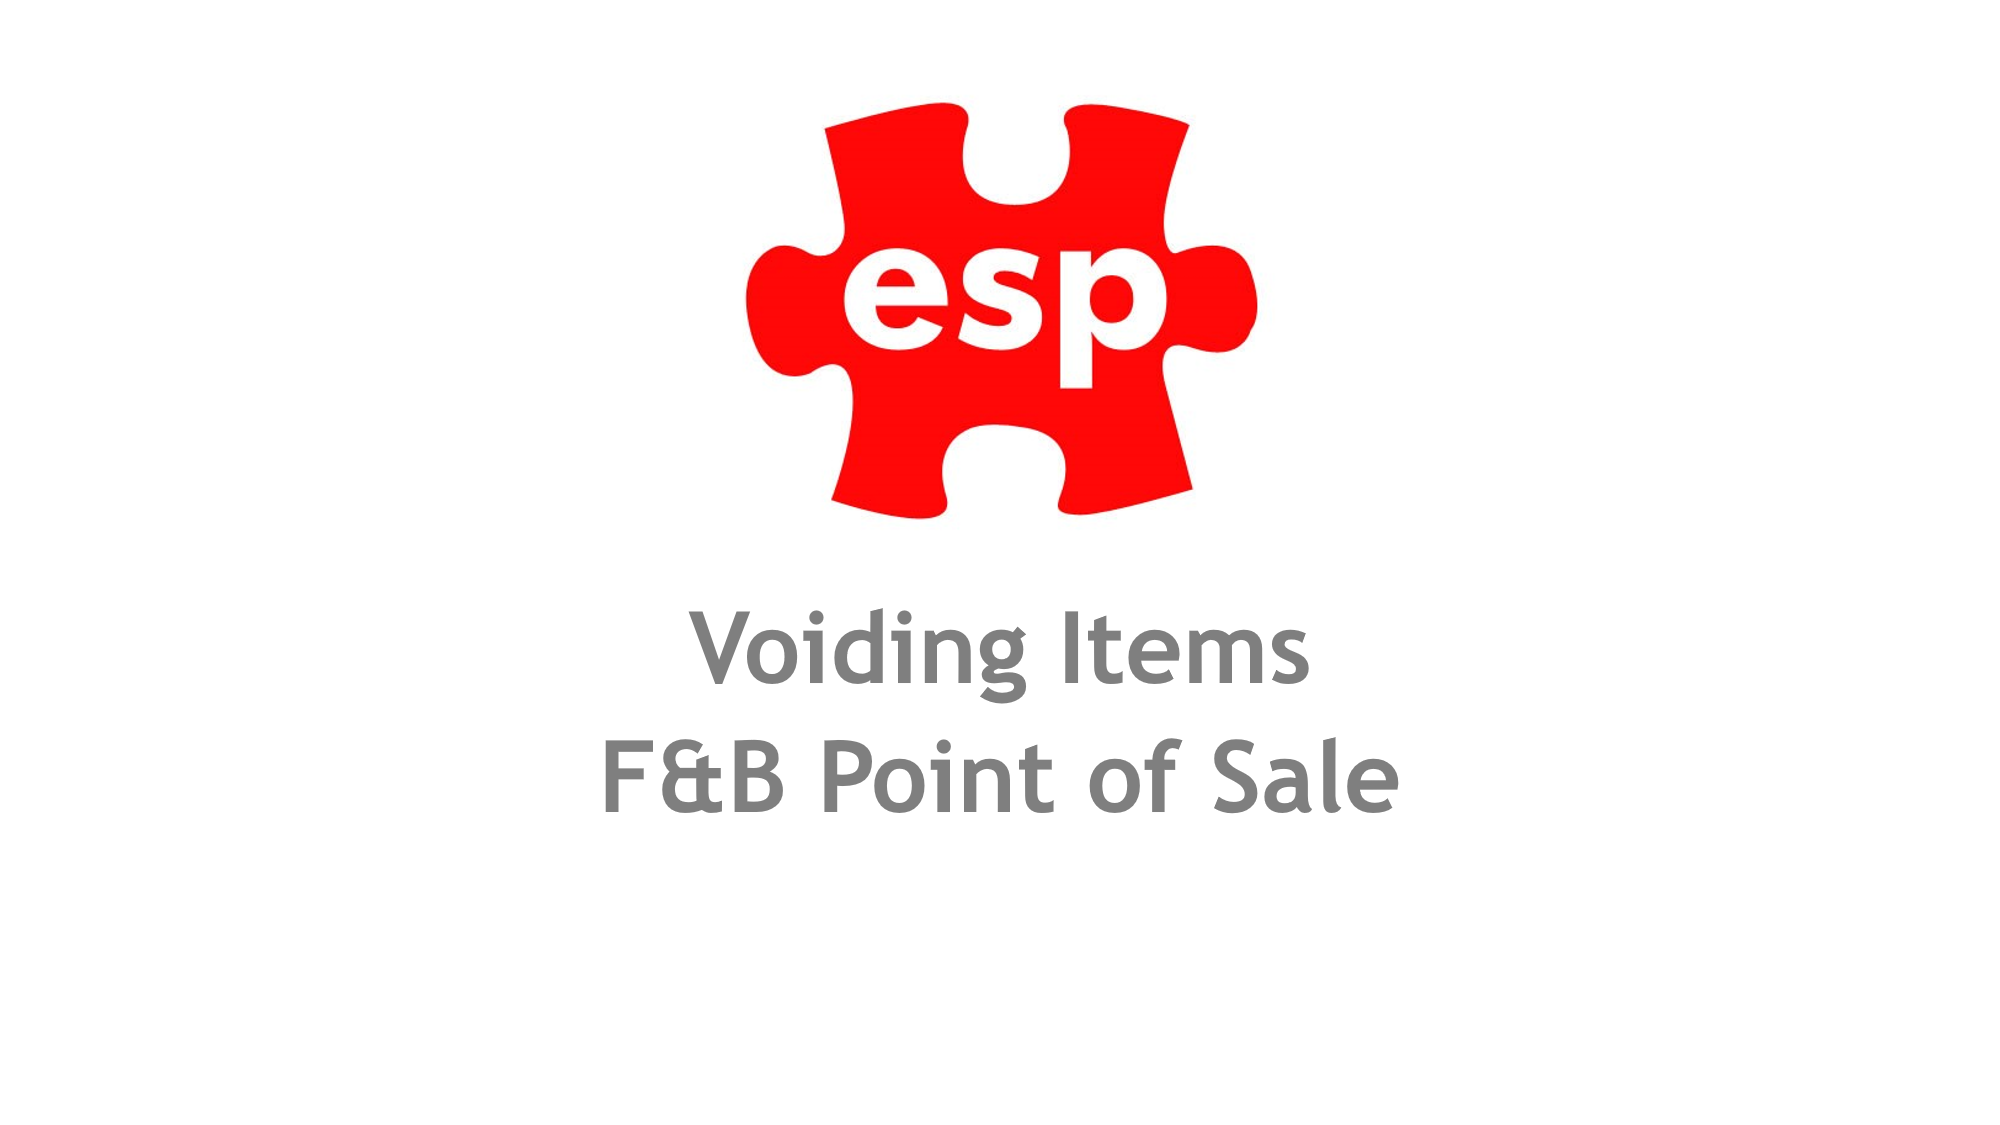 Voiding Items F&B Point of Sale